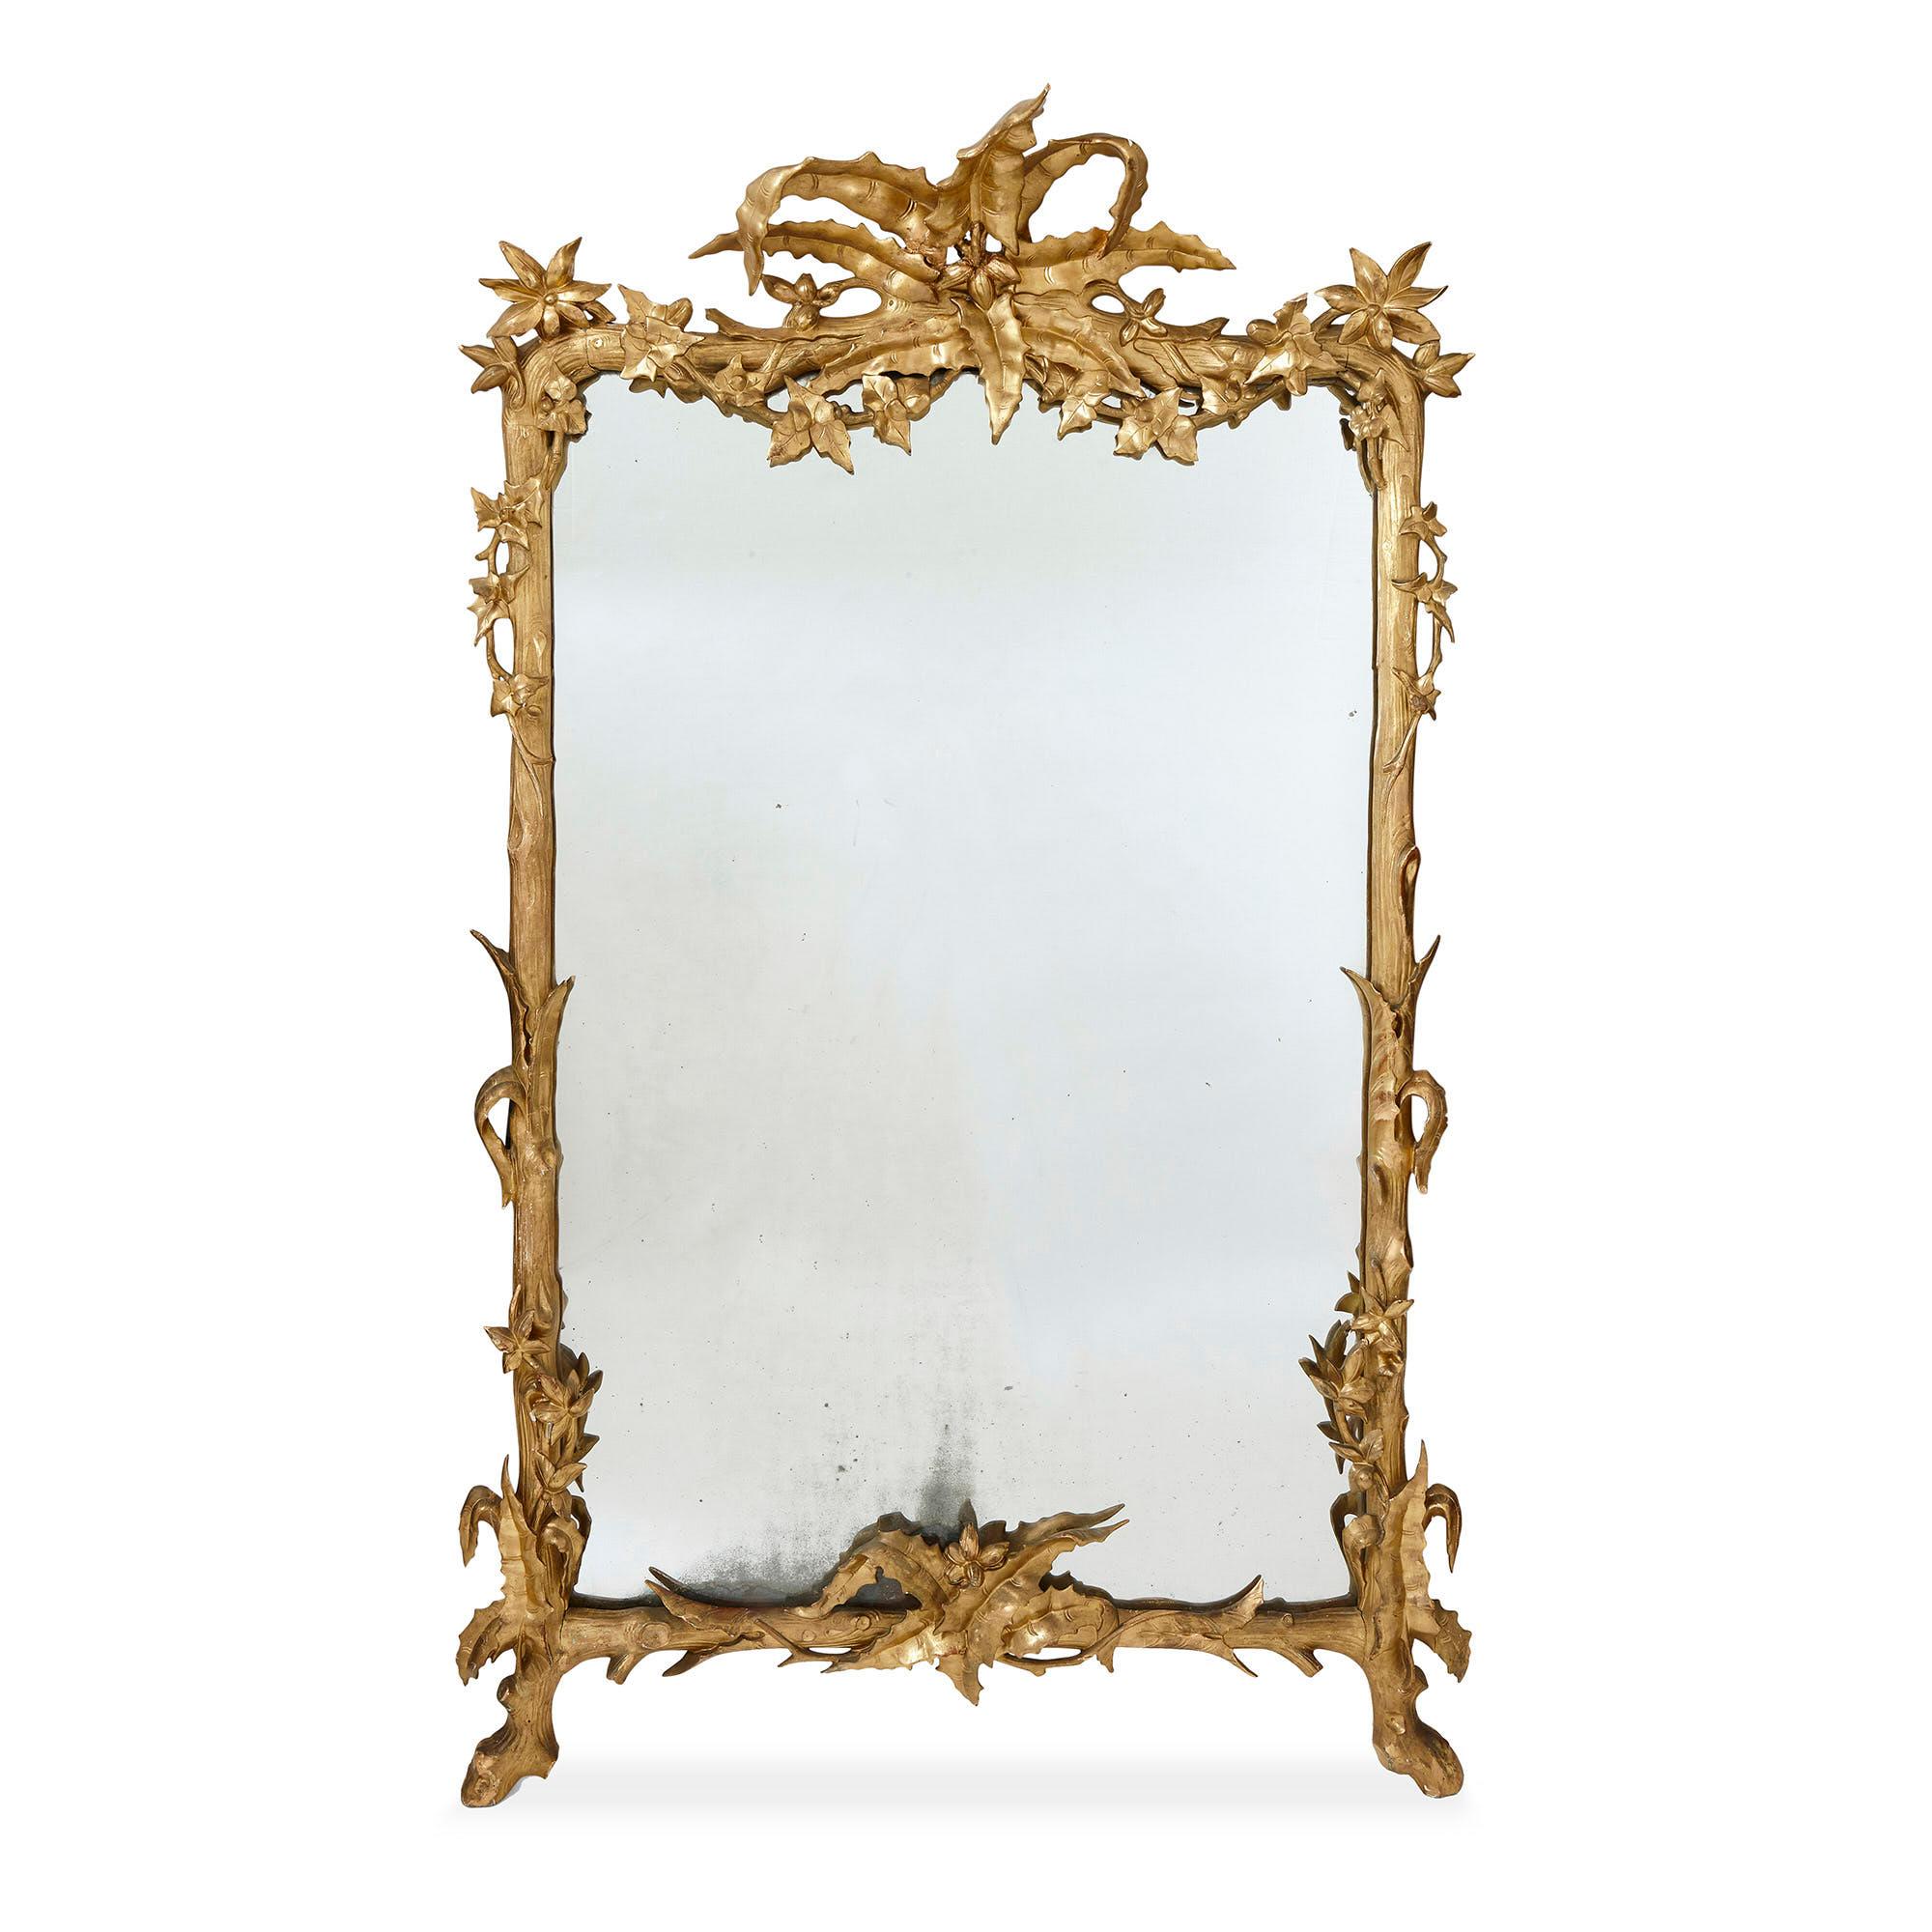 Pair of large carved and gilt wood floral mirrors
French, 19th century
Measures: Height 210cm, width 132cm, depth 30cm

Each mirror in this pair features a richly carved and warmly gilt wooden frame. The frame of each is carved in a striking